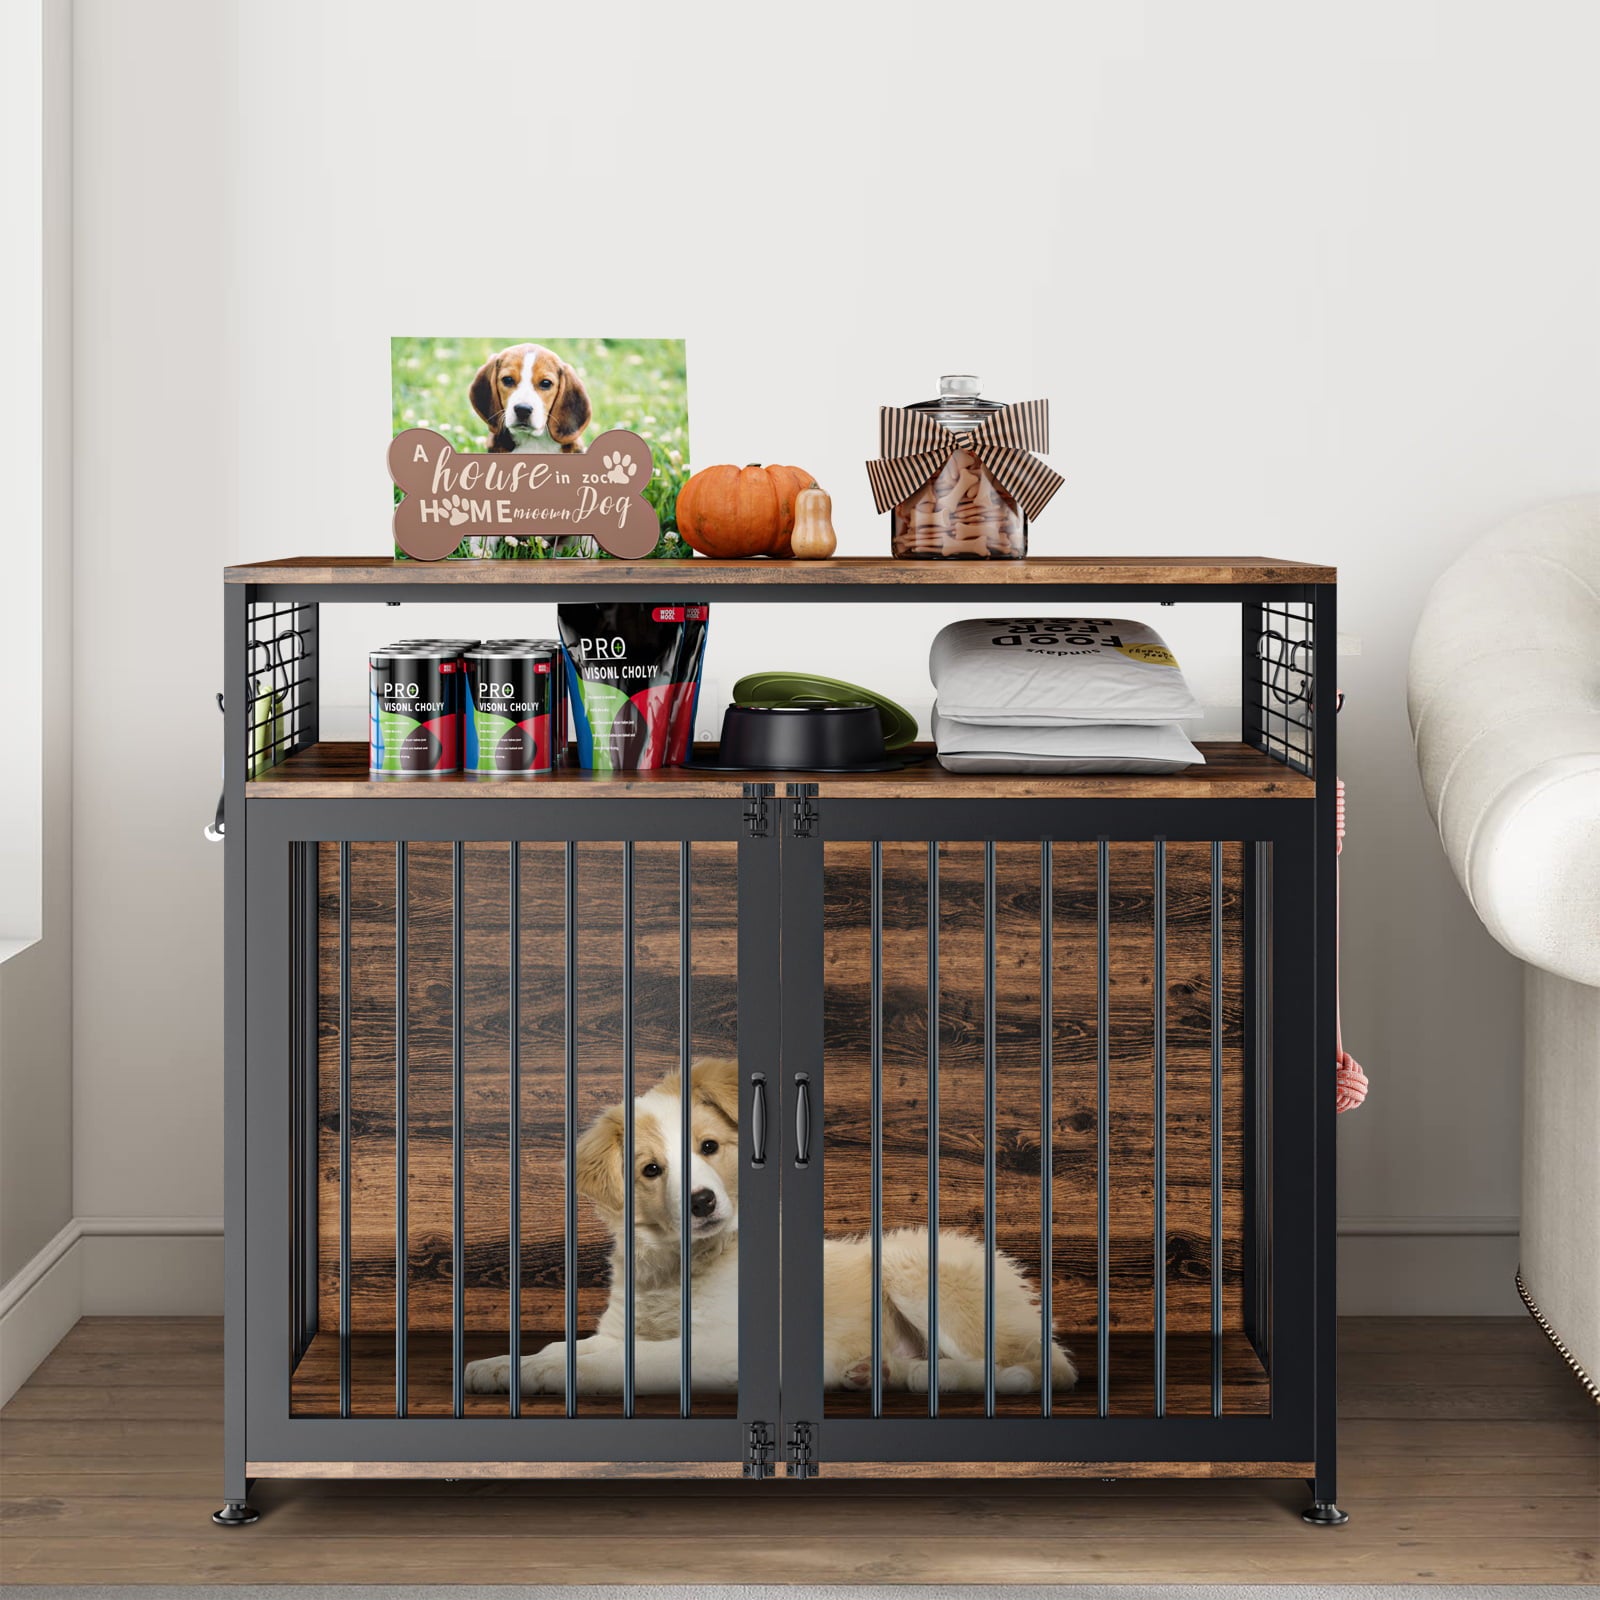 ABORON Wooden Large Dog Crate Furniture， 33/41 InchHeavy Duty Dog Cages for Medium/ Small Dogs Indoor， Super Sturdy Dog Kennel with Storage